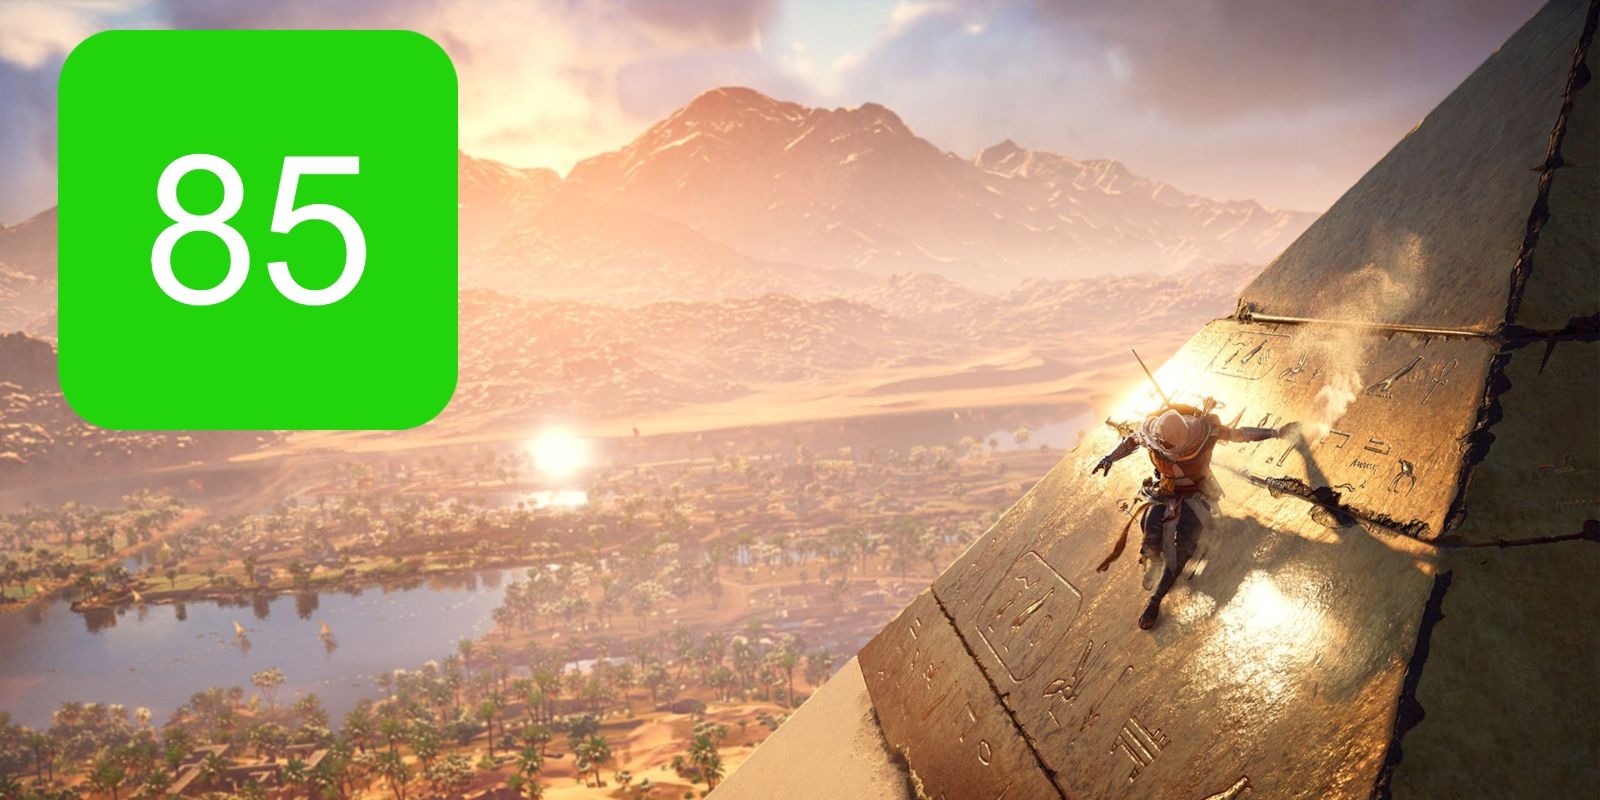 The Xbox One metascore for assassin's creed origins